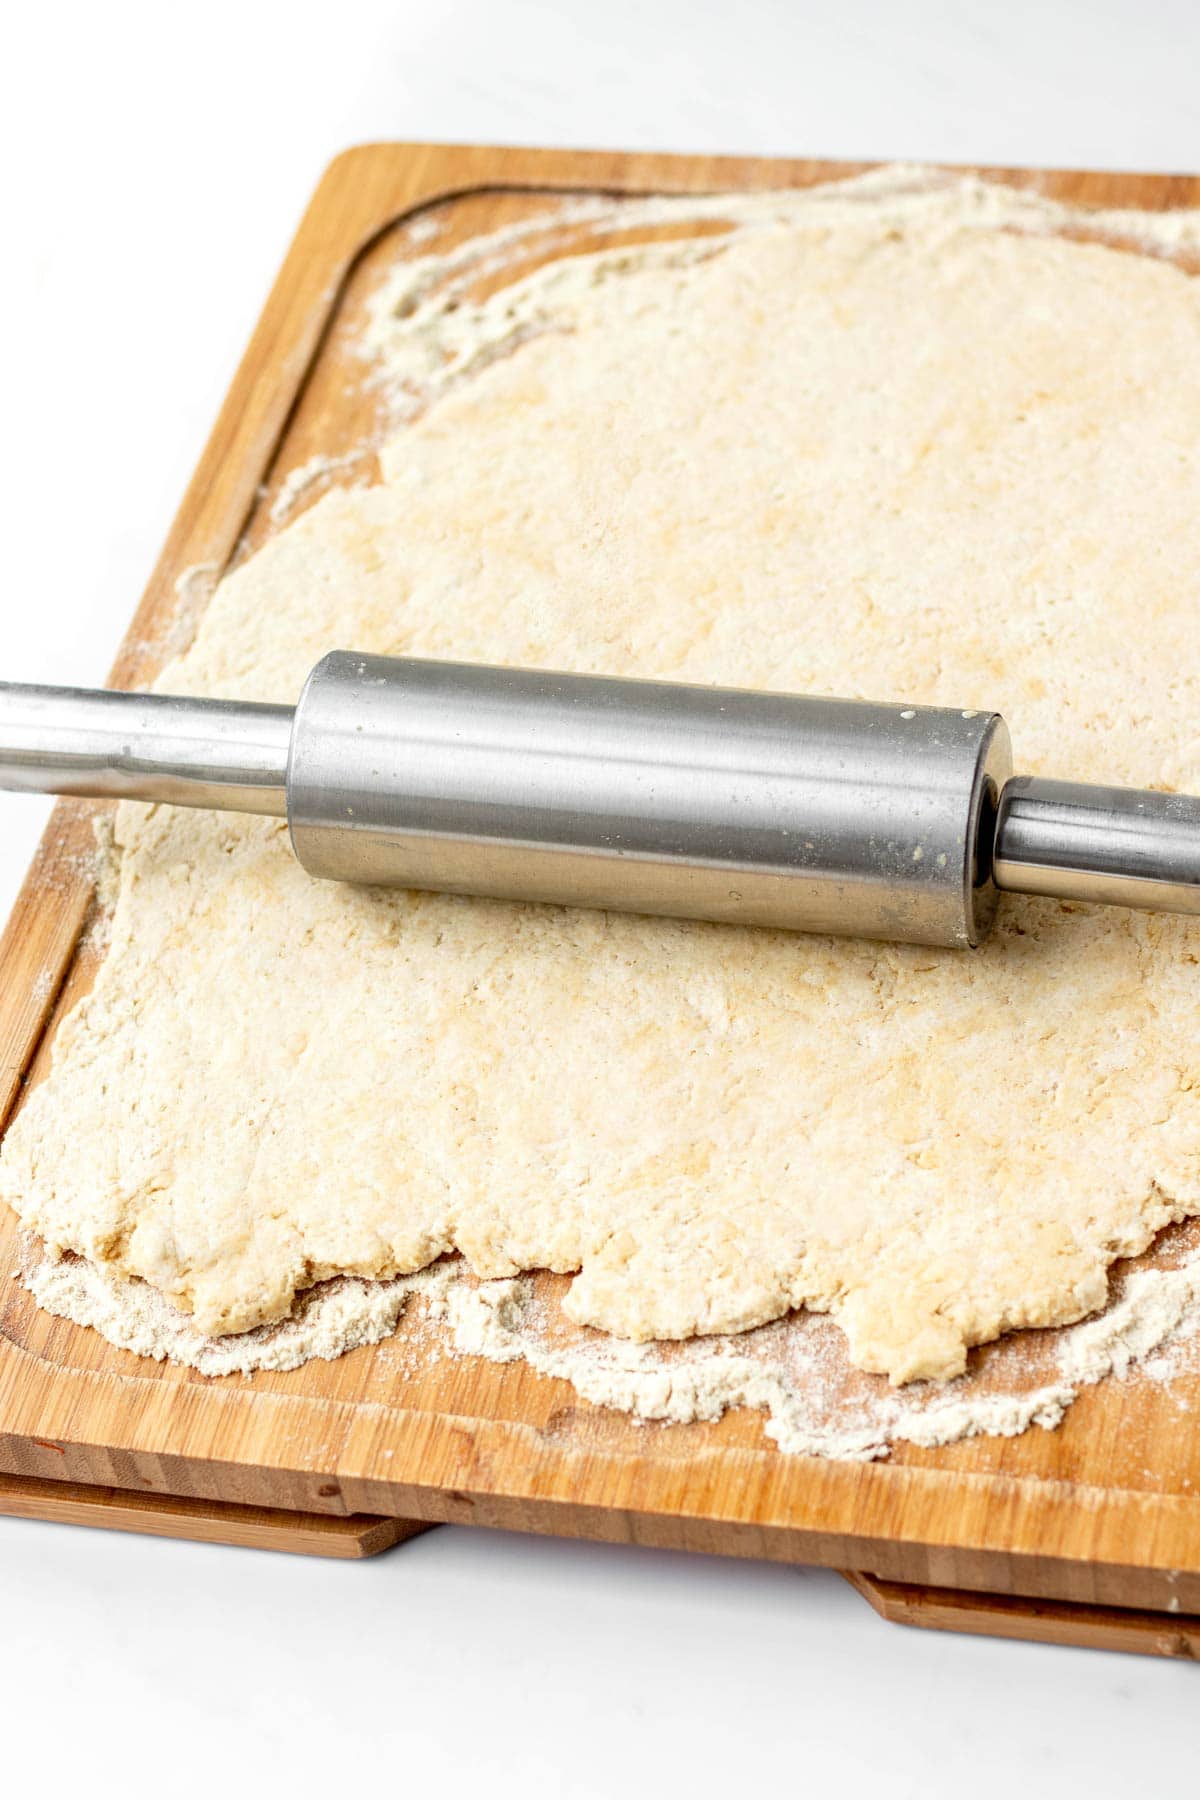 A rolling pin rolling out 3 ingredient pizza dough on a cutting board.